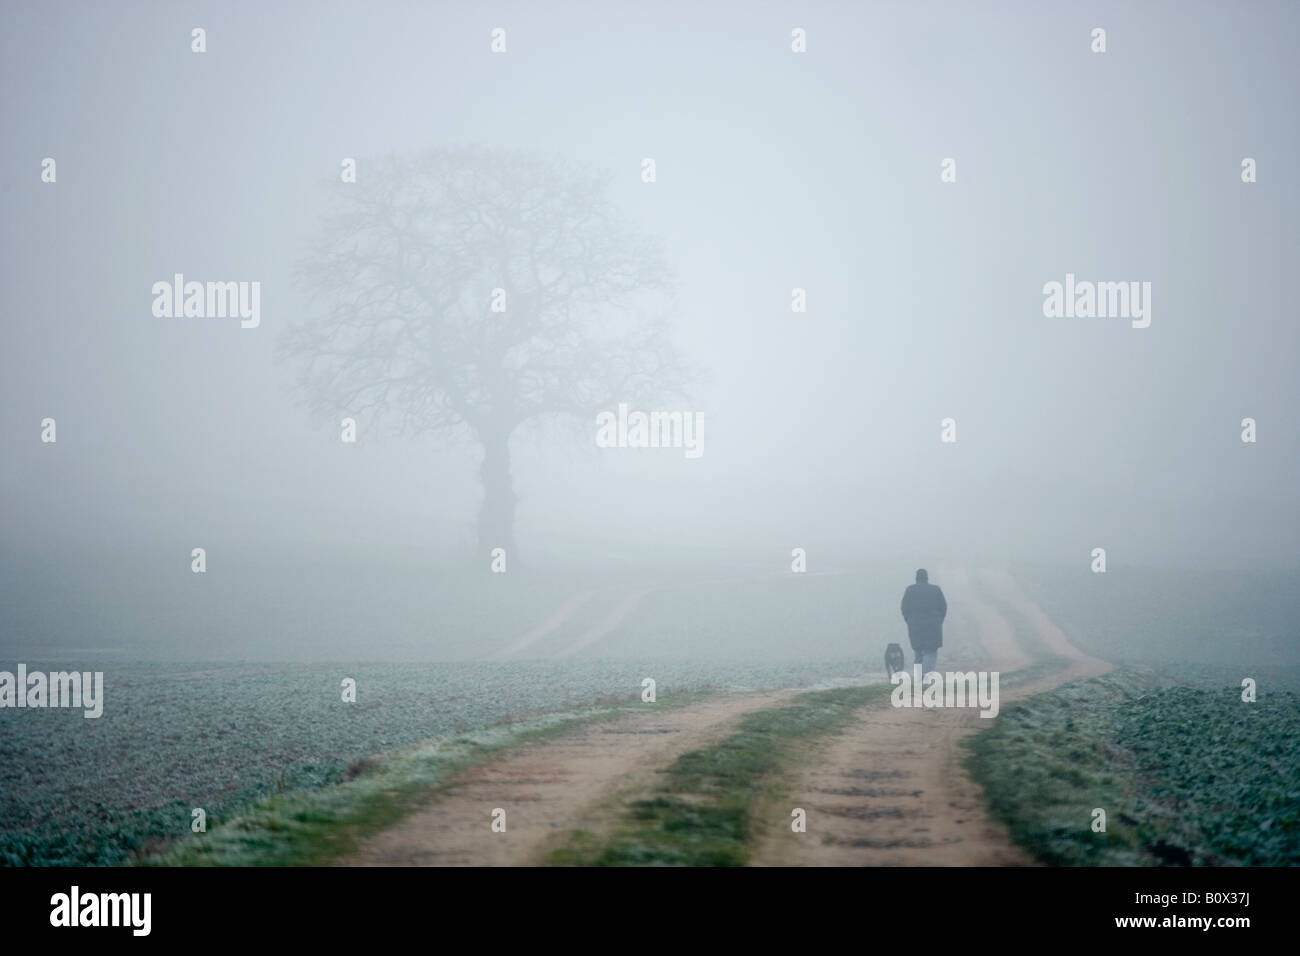 A person and dog walking along a foggy country path Stock Photo